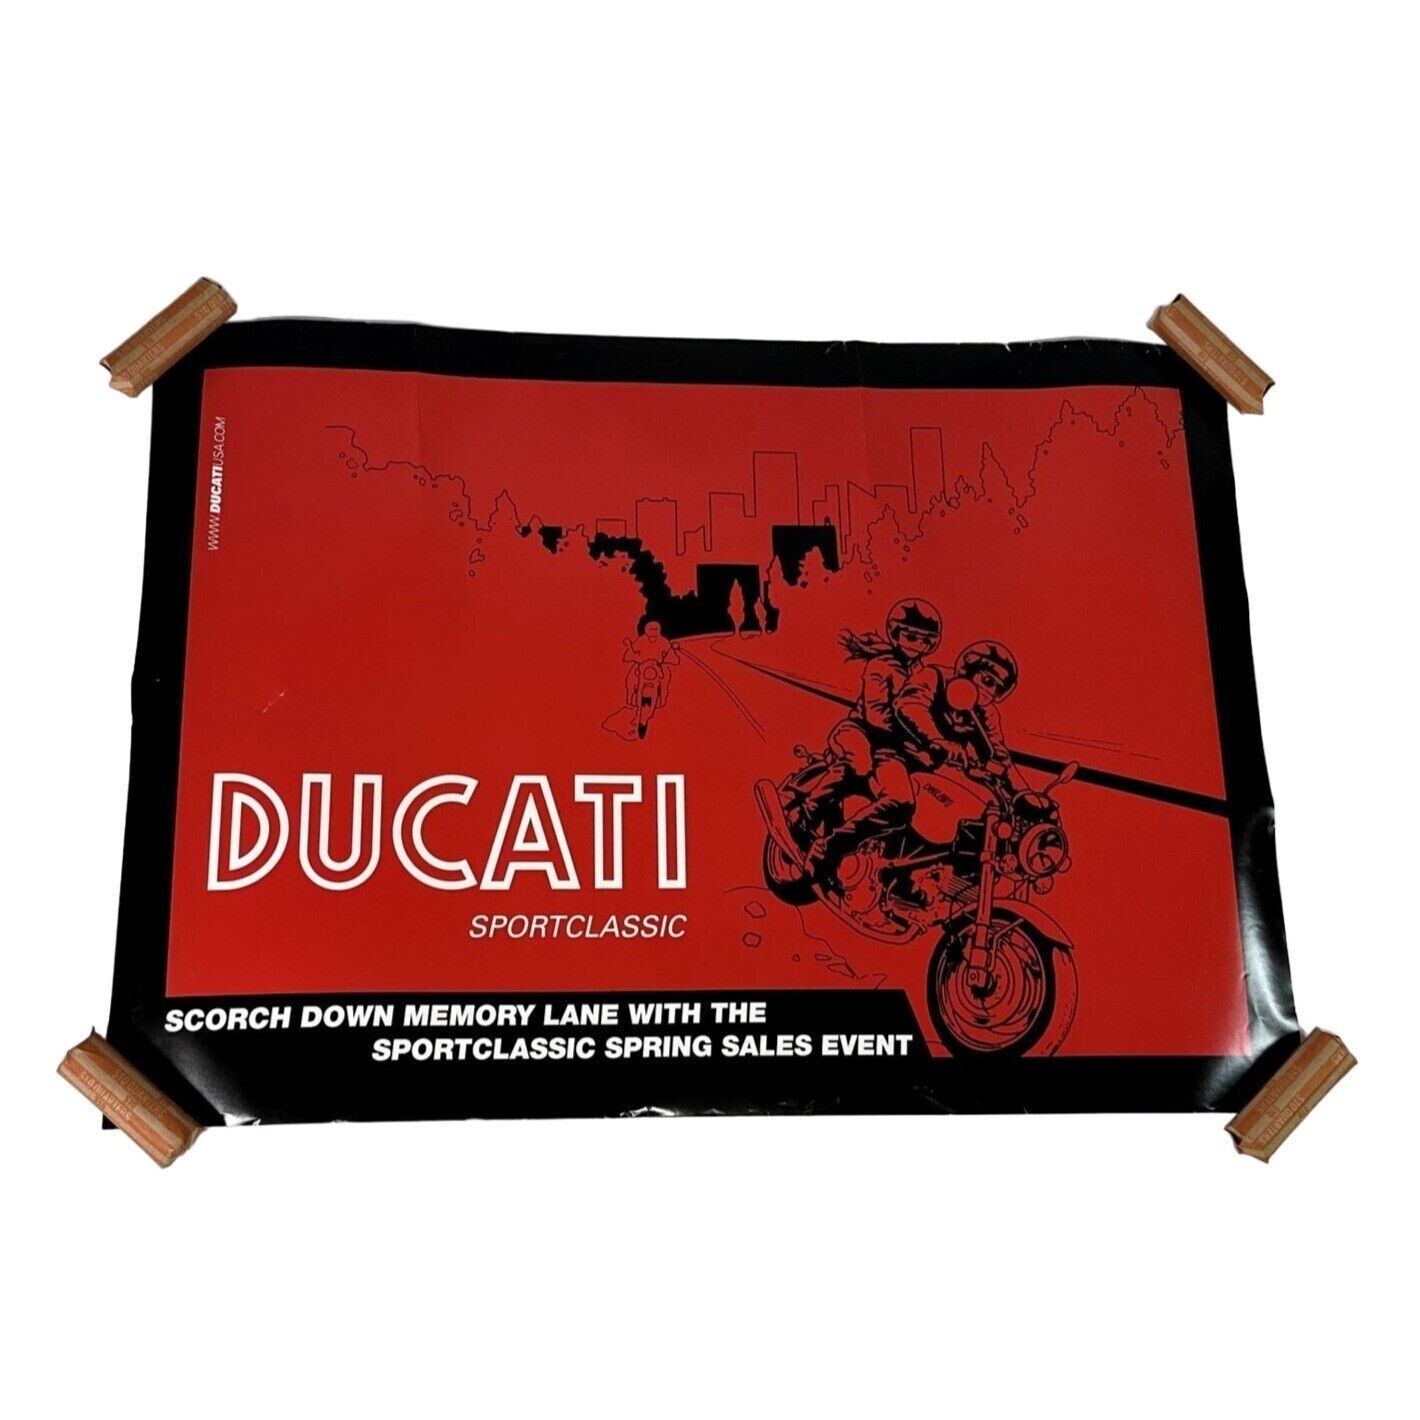 DUCATI SportClassic Sales Event Poster 24 x 17 One Sided Sheet